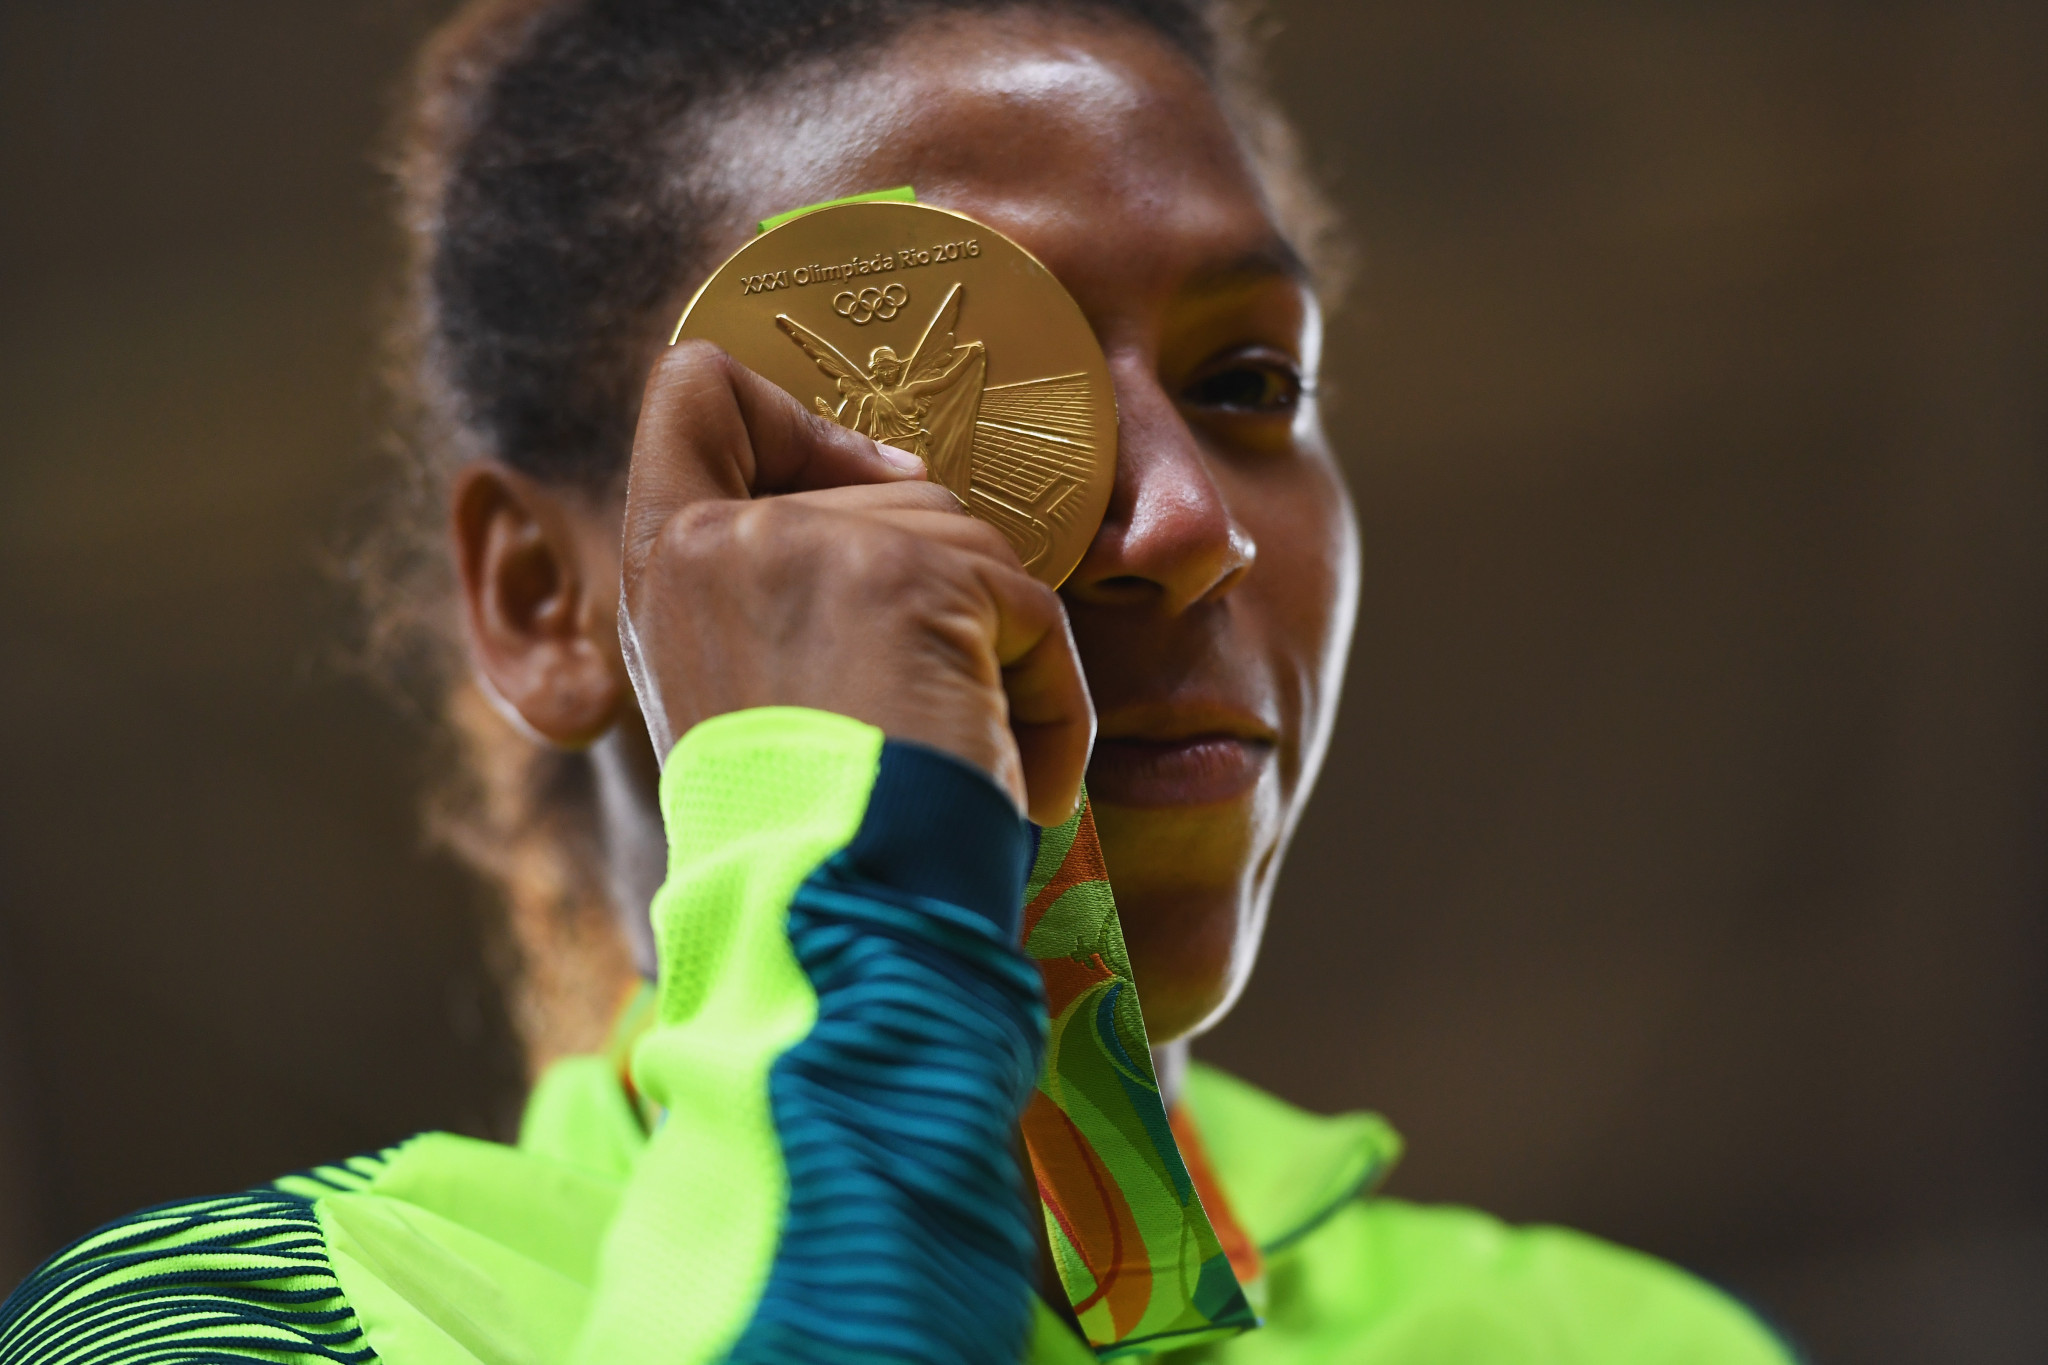 Olympic champion Rafaela Silva delivered a speech to the students in the hope of inspiring them to have a career in sport ©Getty Images